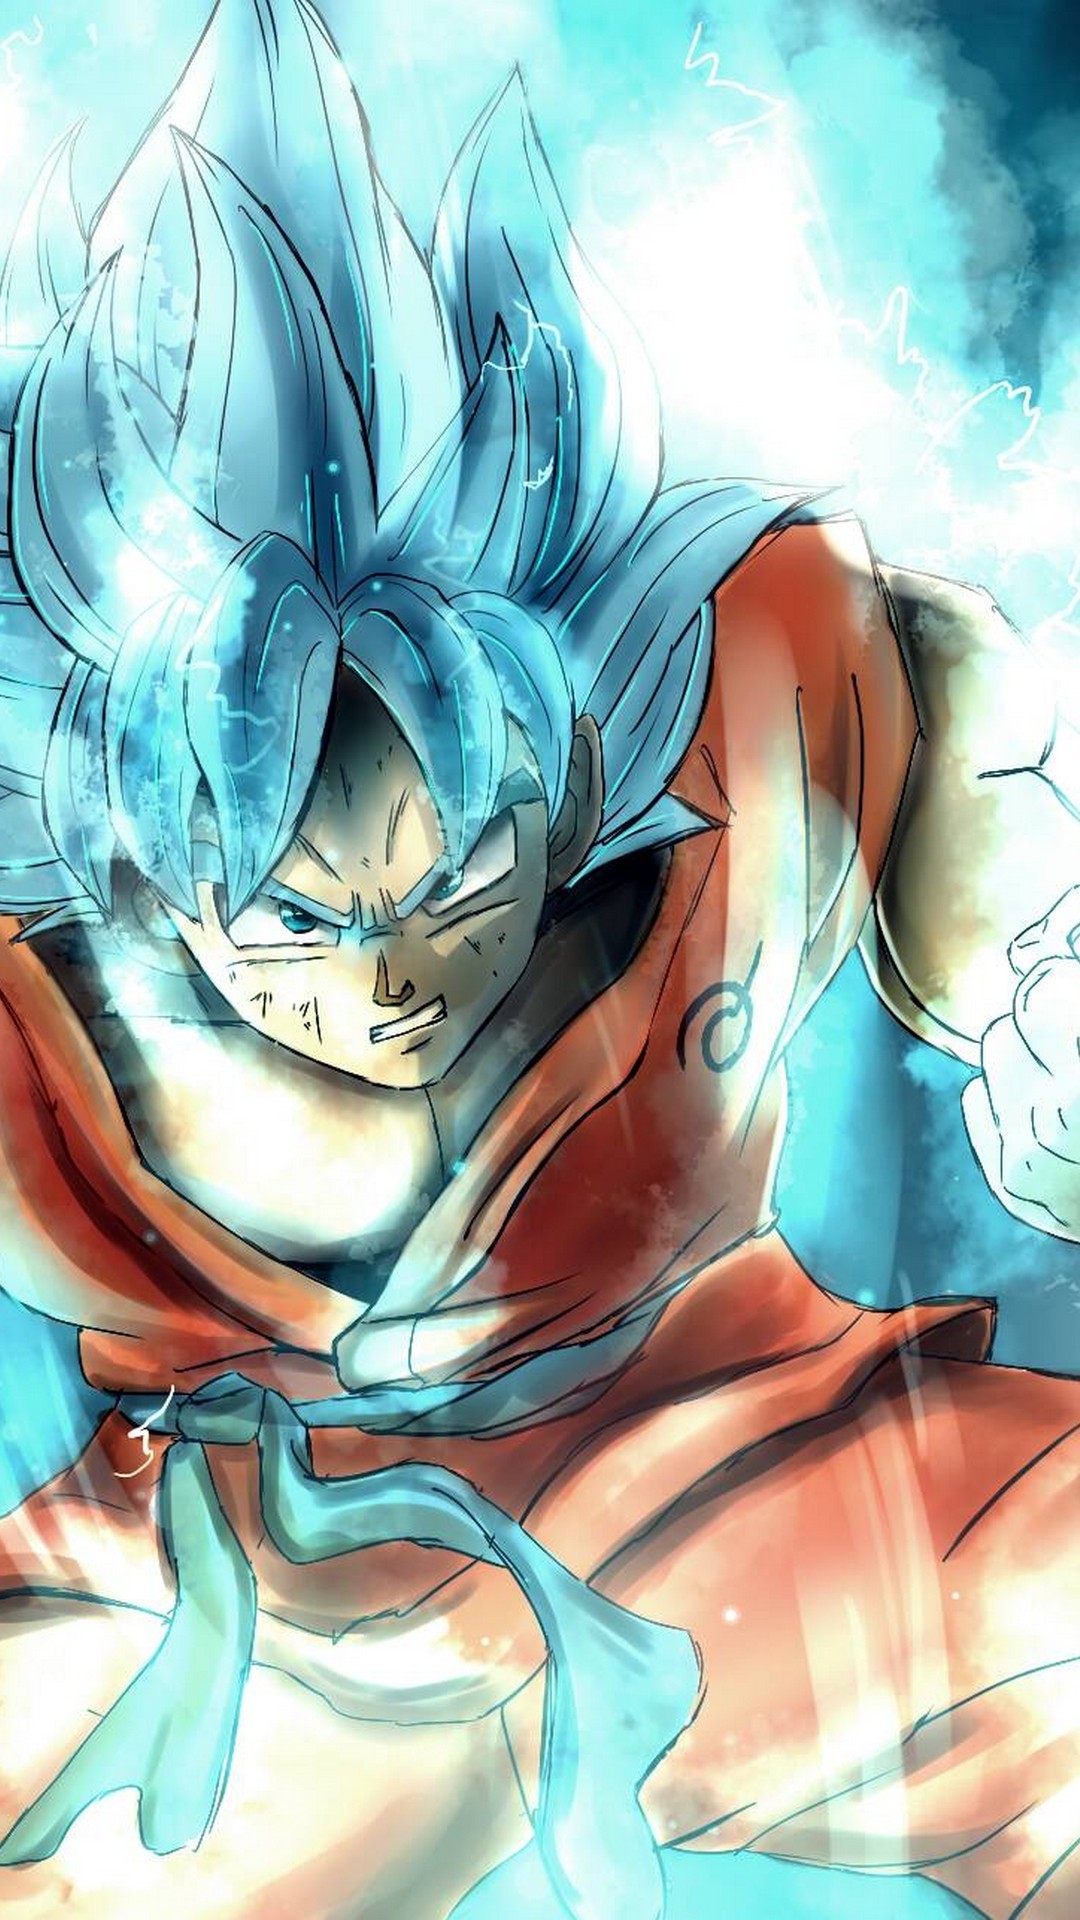 Goku SSJ Blue Wallpaper iPhone with image resolution 1080x1920 pixel. You can make this wallpaper for your iPhone 5, 6, 7, 8, X backgrounds, Mobile Screensaver, or iPad Lock Screen